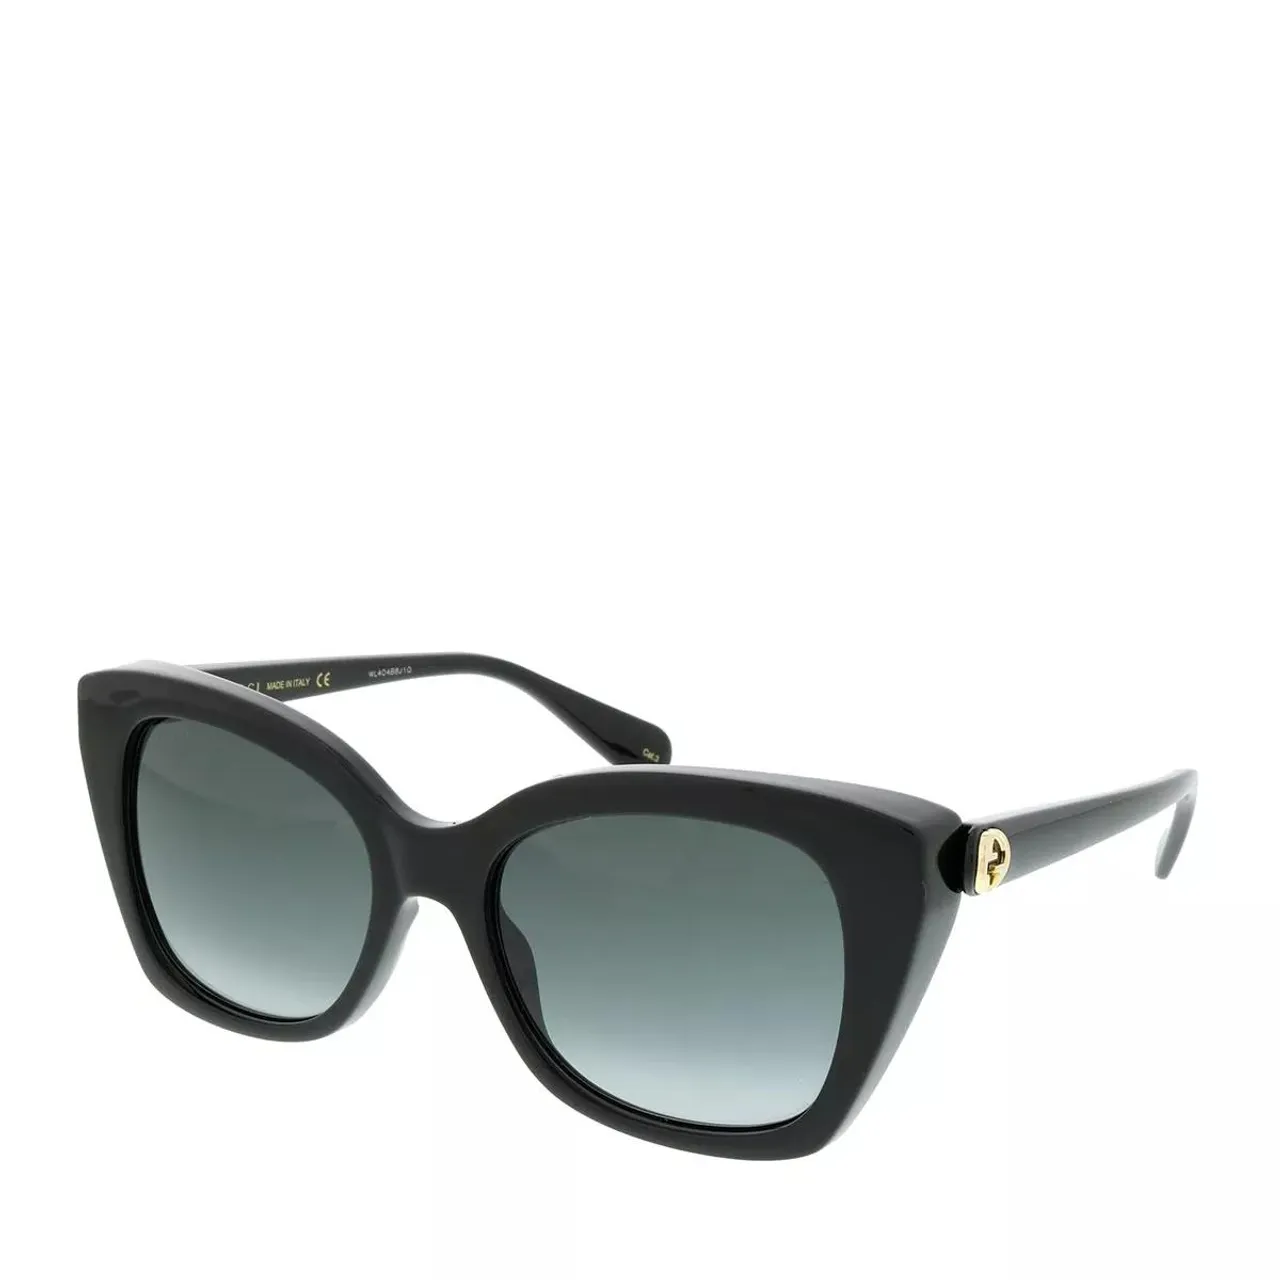 Gucci Sonnenbrille - GG0921S-001 55 Sunglass WOMAN INJECTION